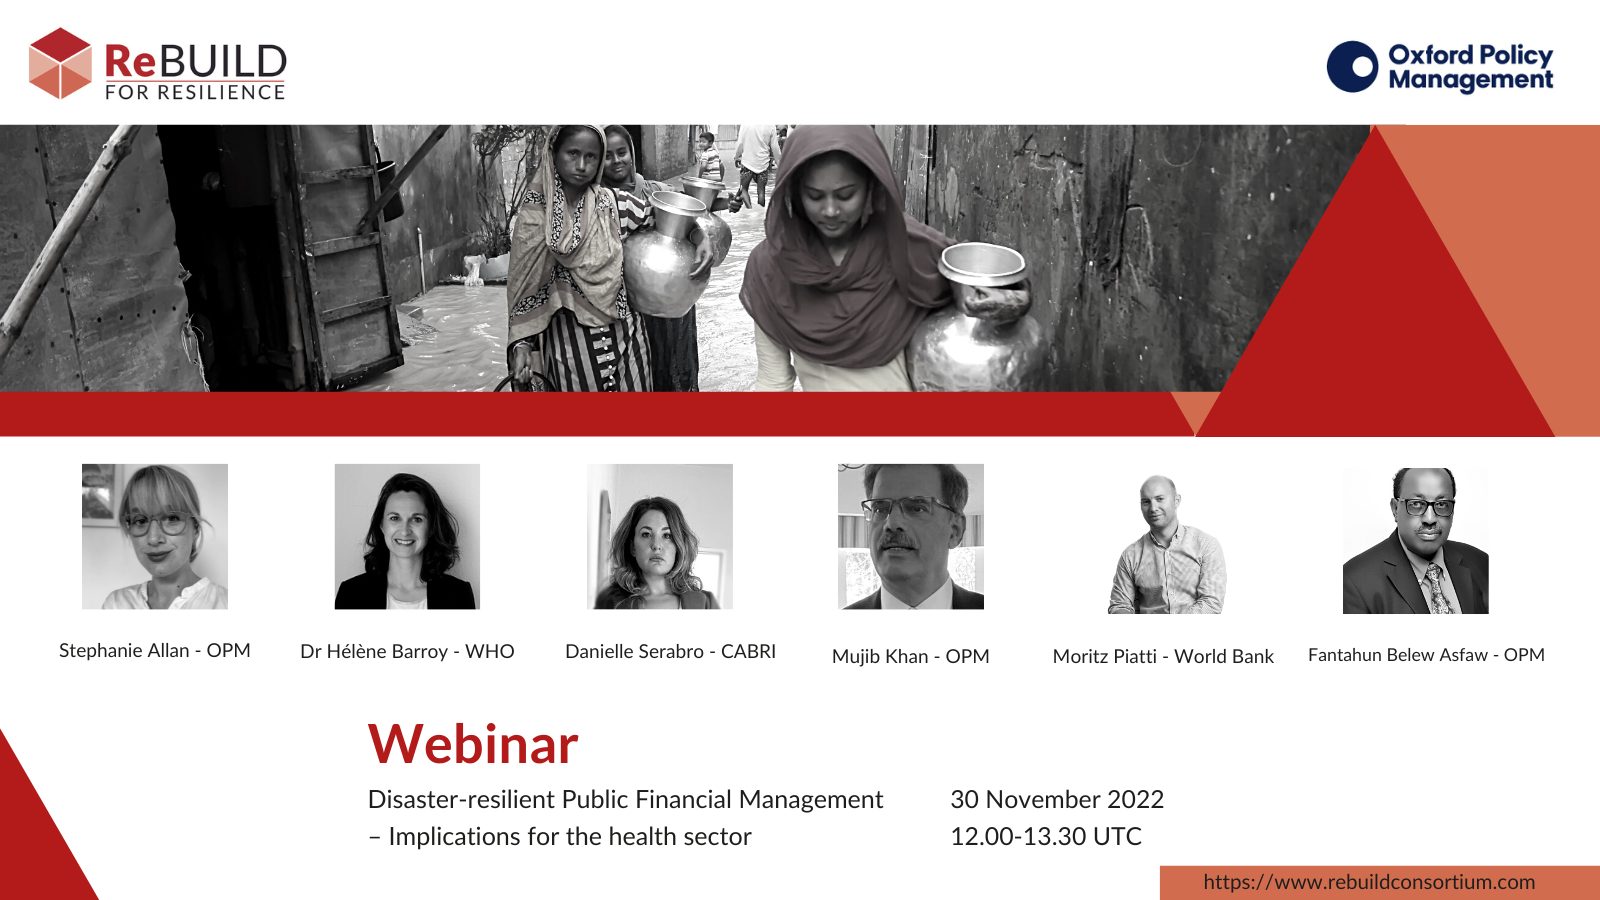 Advert for the webinar featuring black and white photos of women carrying water ctonaers through a flood and headshots of 6 speakers